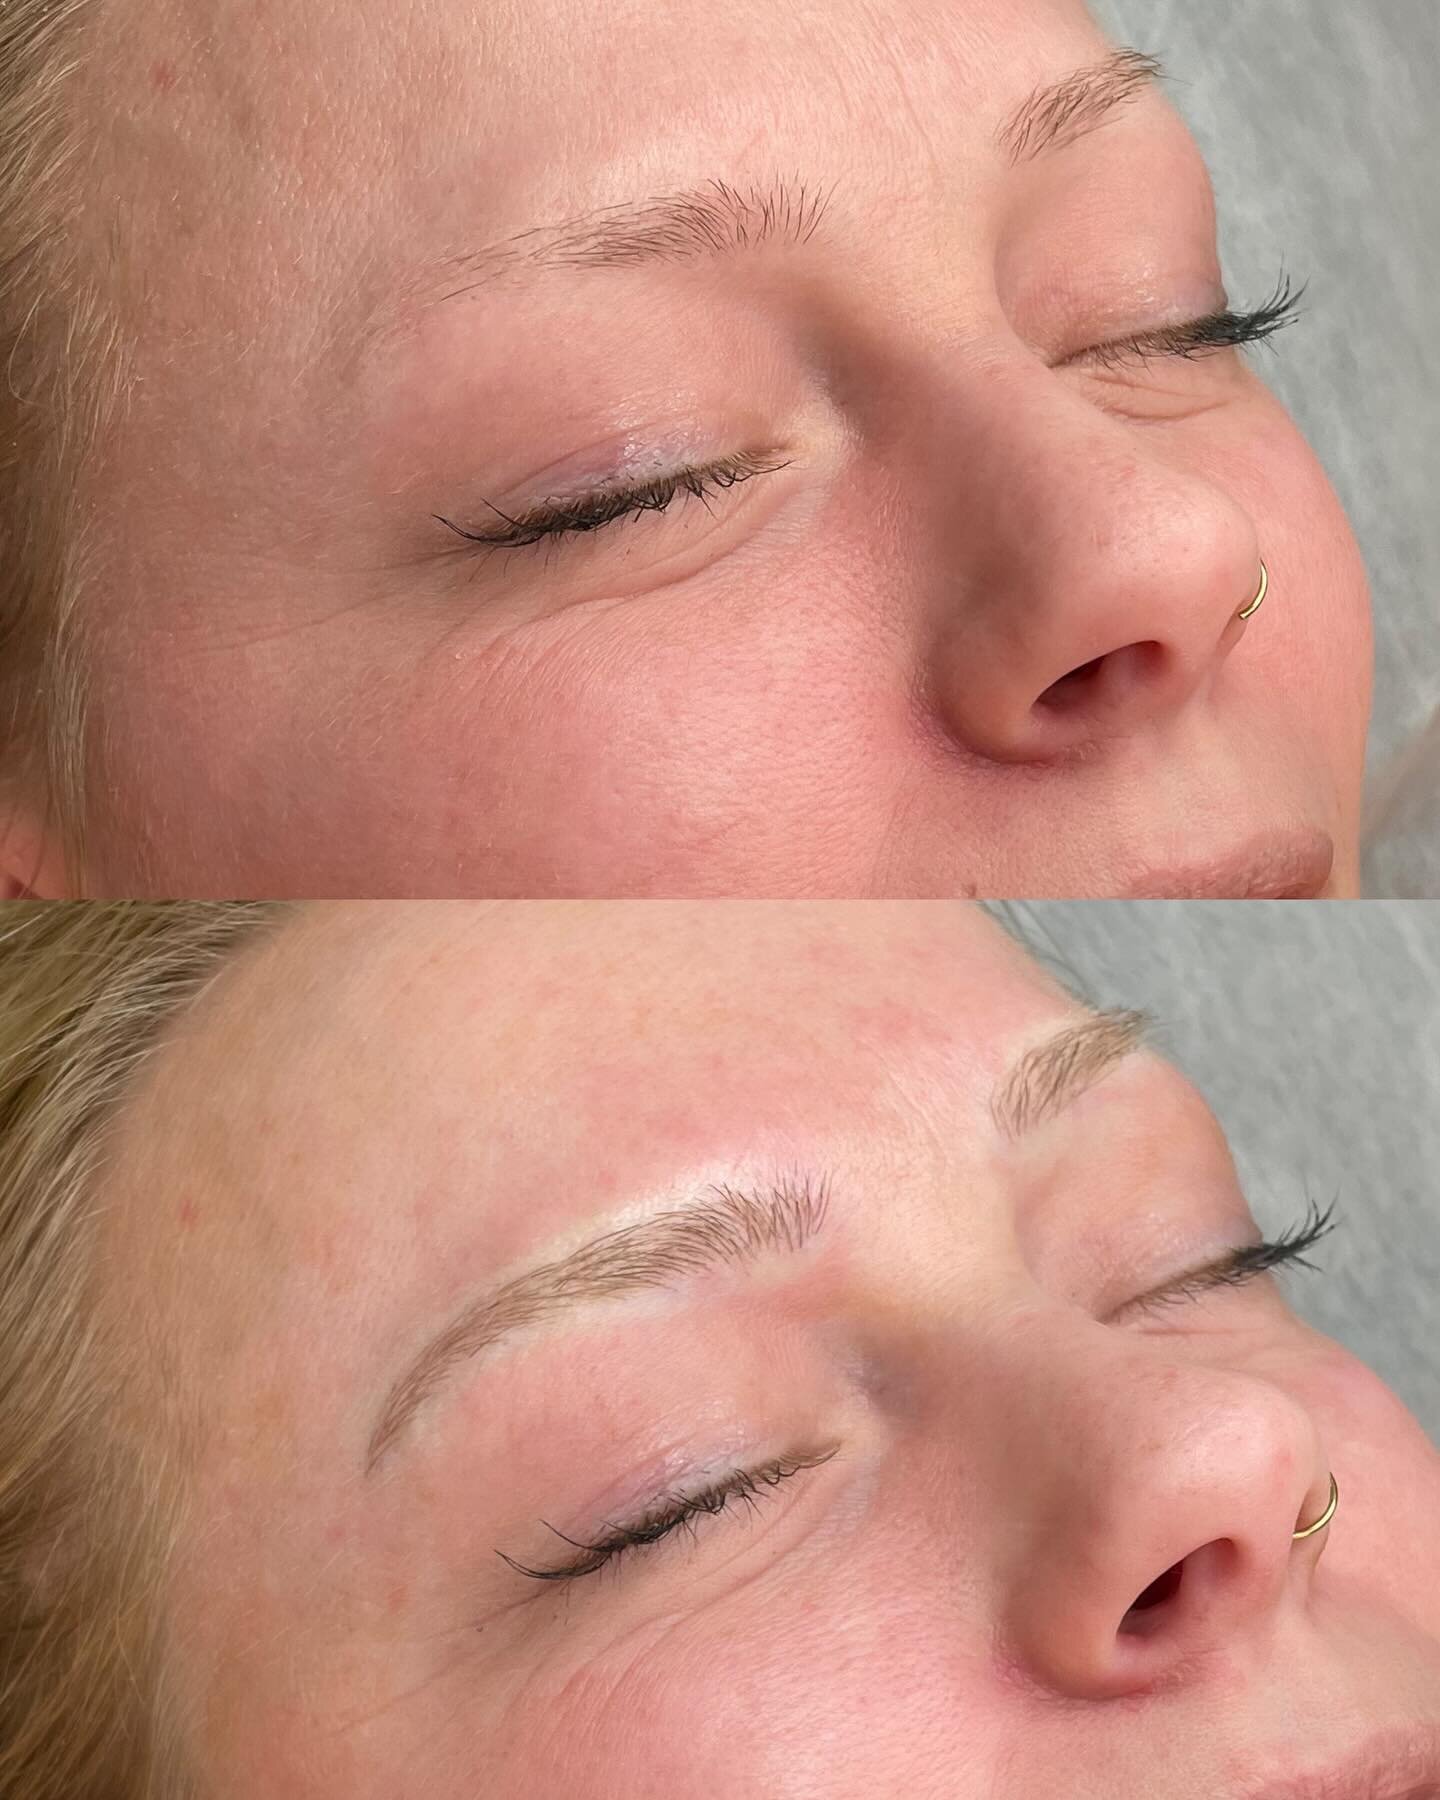 M I C R O B L A D I N G

Microblading is a semi-permanent treatment to enhance the appearance of brows! Pigment is tattooed into the skin using a disposable hand tool in fine, short strokes to resemble hair. This service begins with a complimentary c